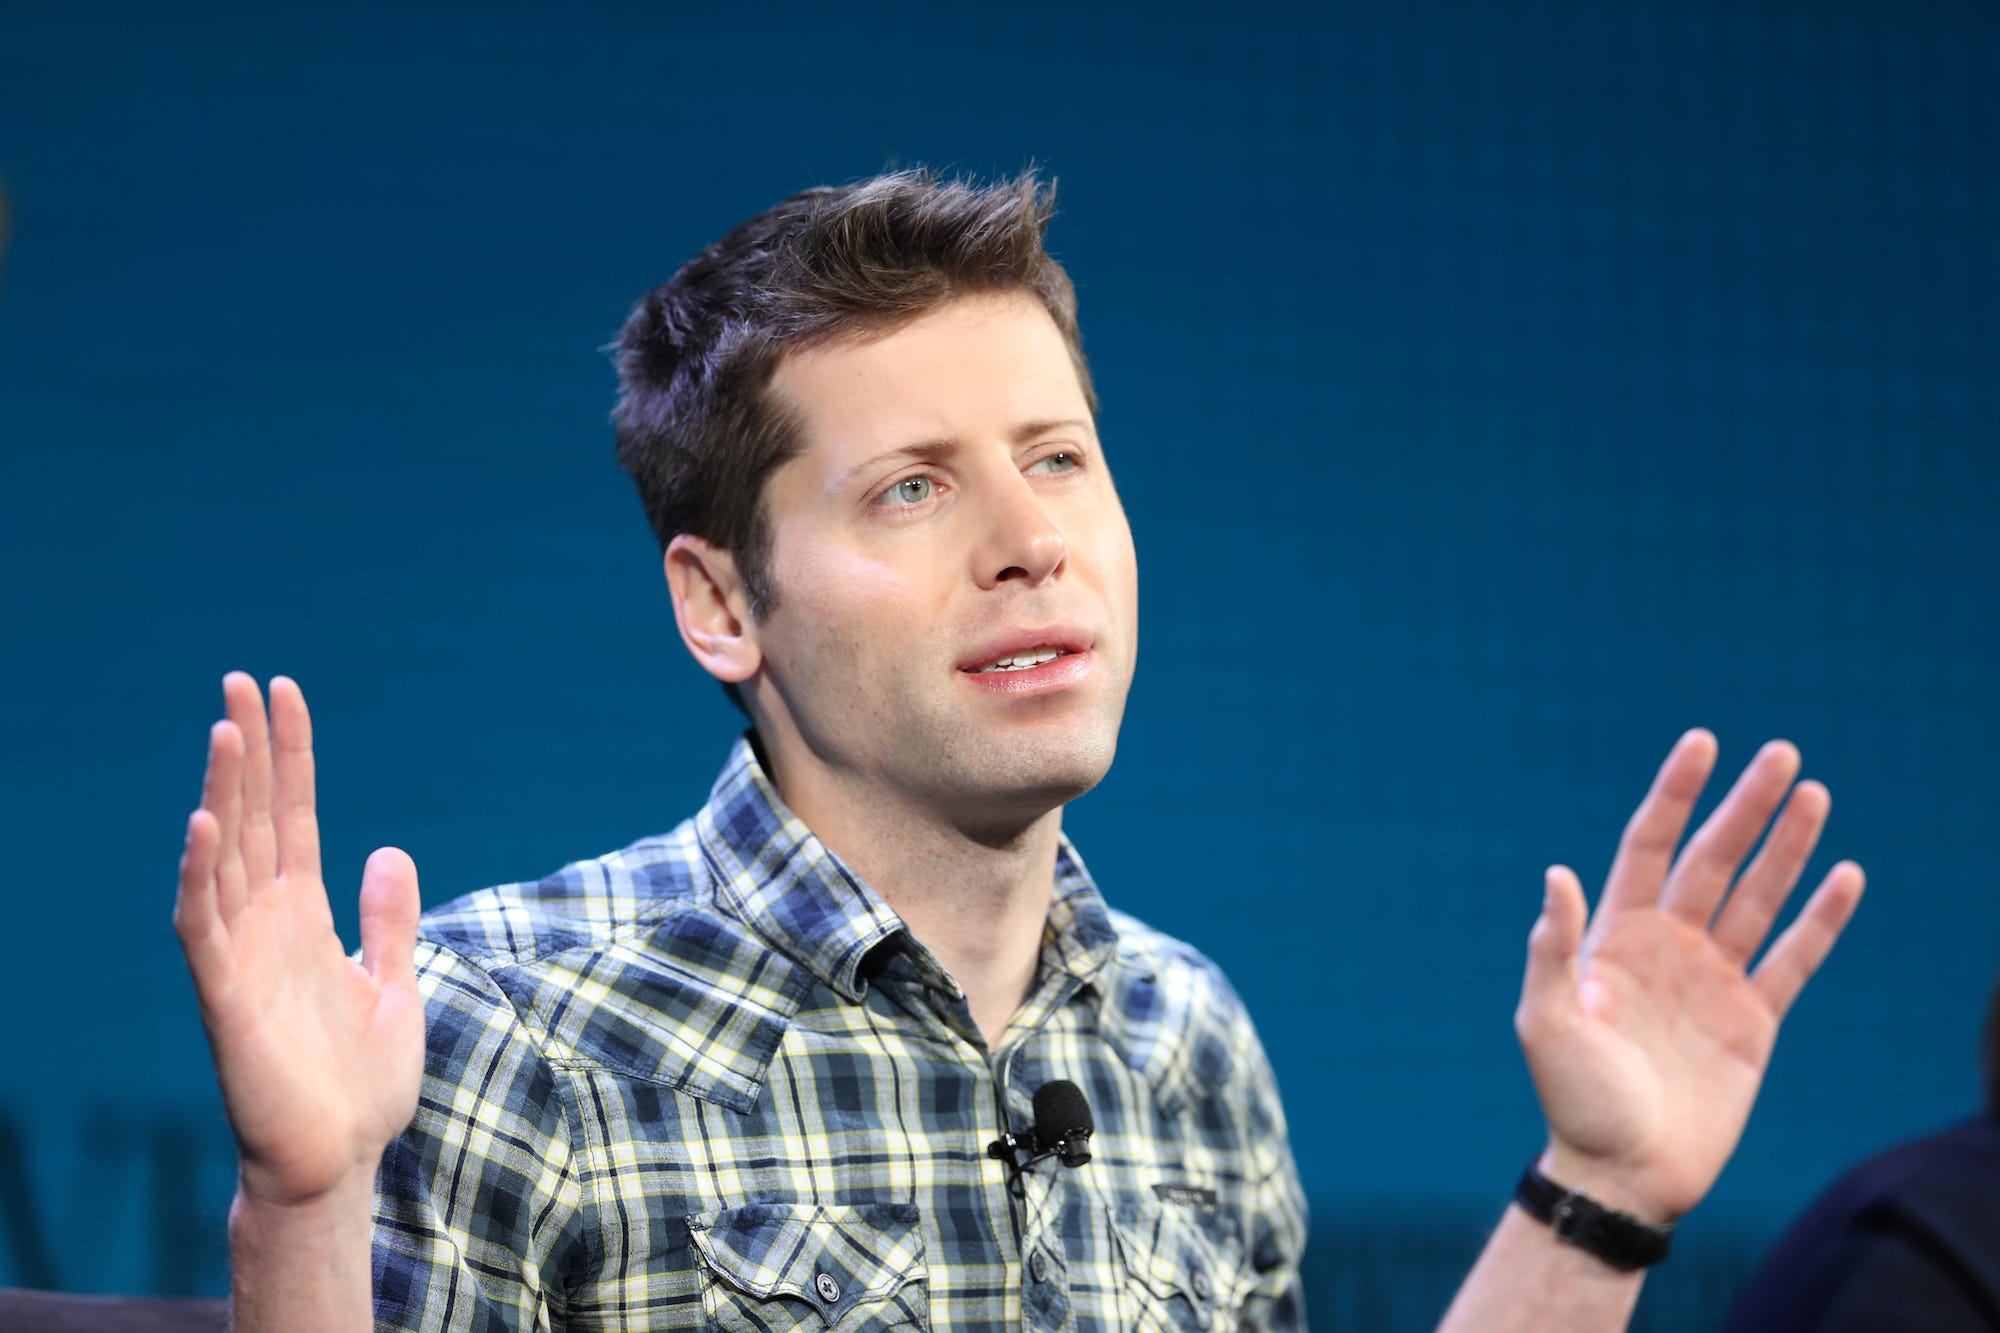 An image of Sam Altman, the CEO of OpenAI, speaking on a stage.